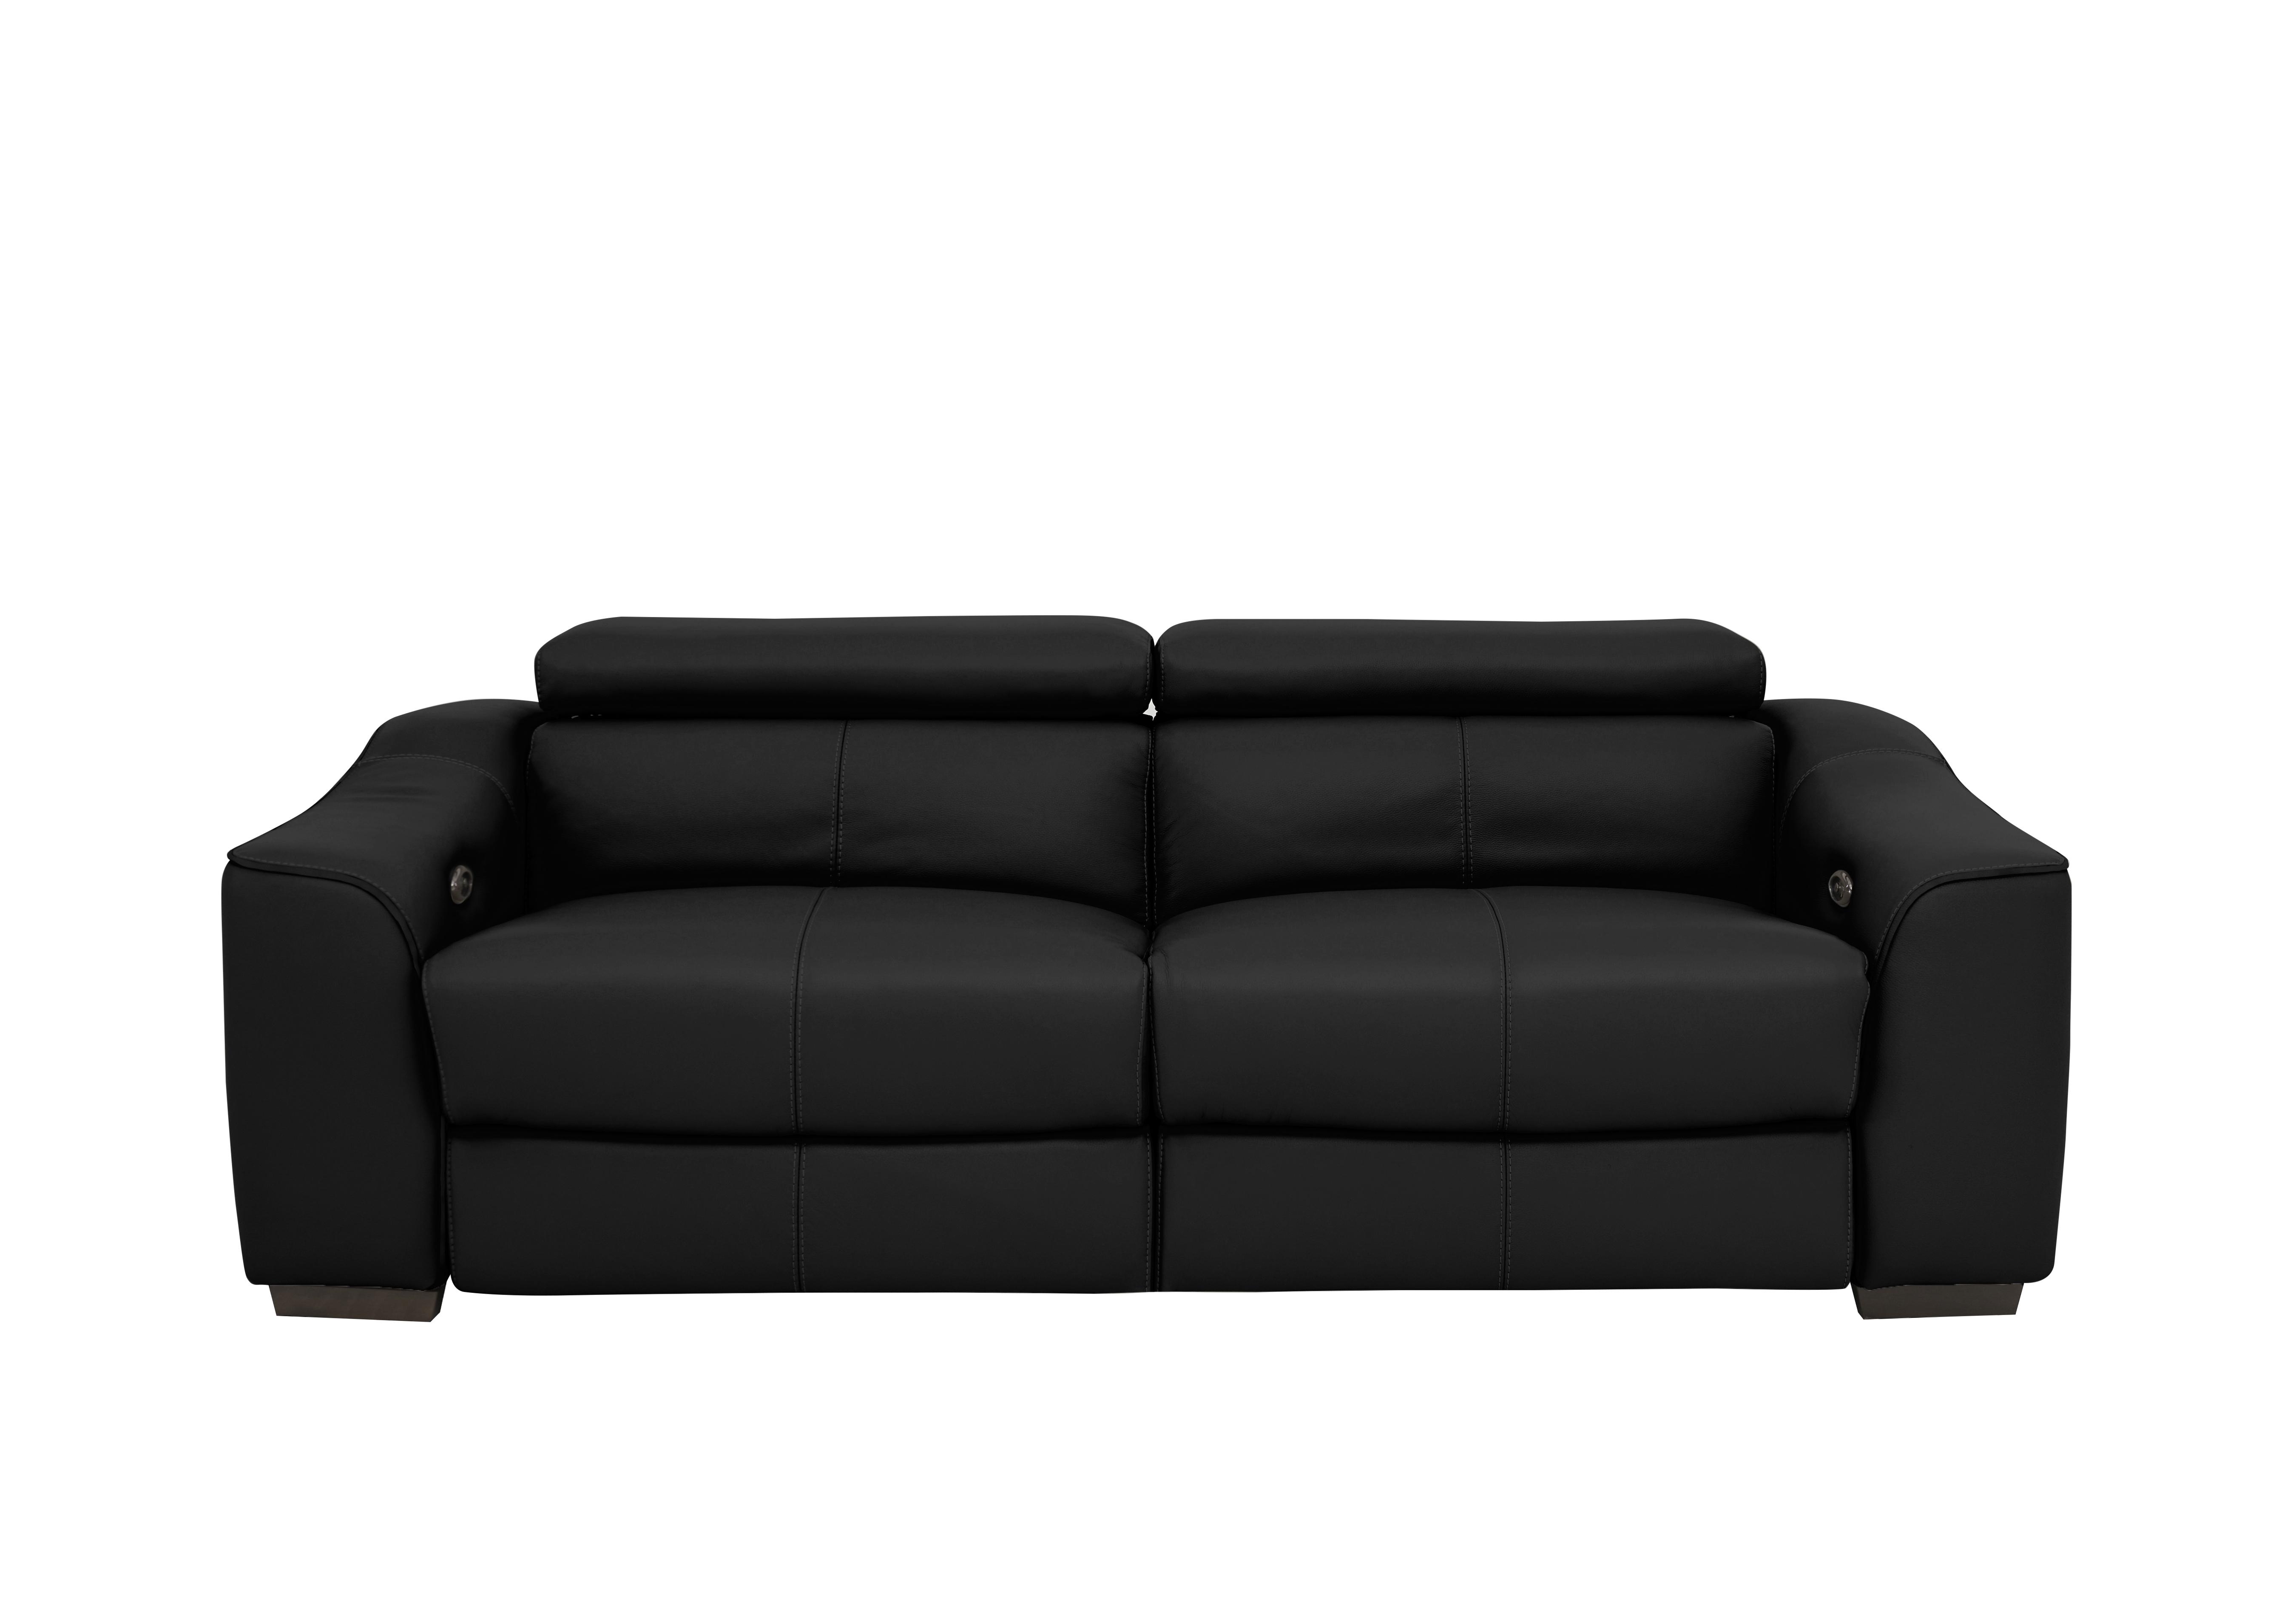 Elixir 3 Seater Leather Sofa in Bv-3500 Classic Black on Furniture Village